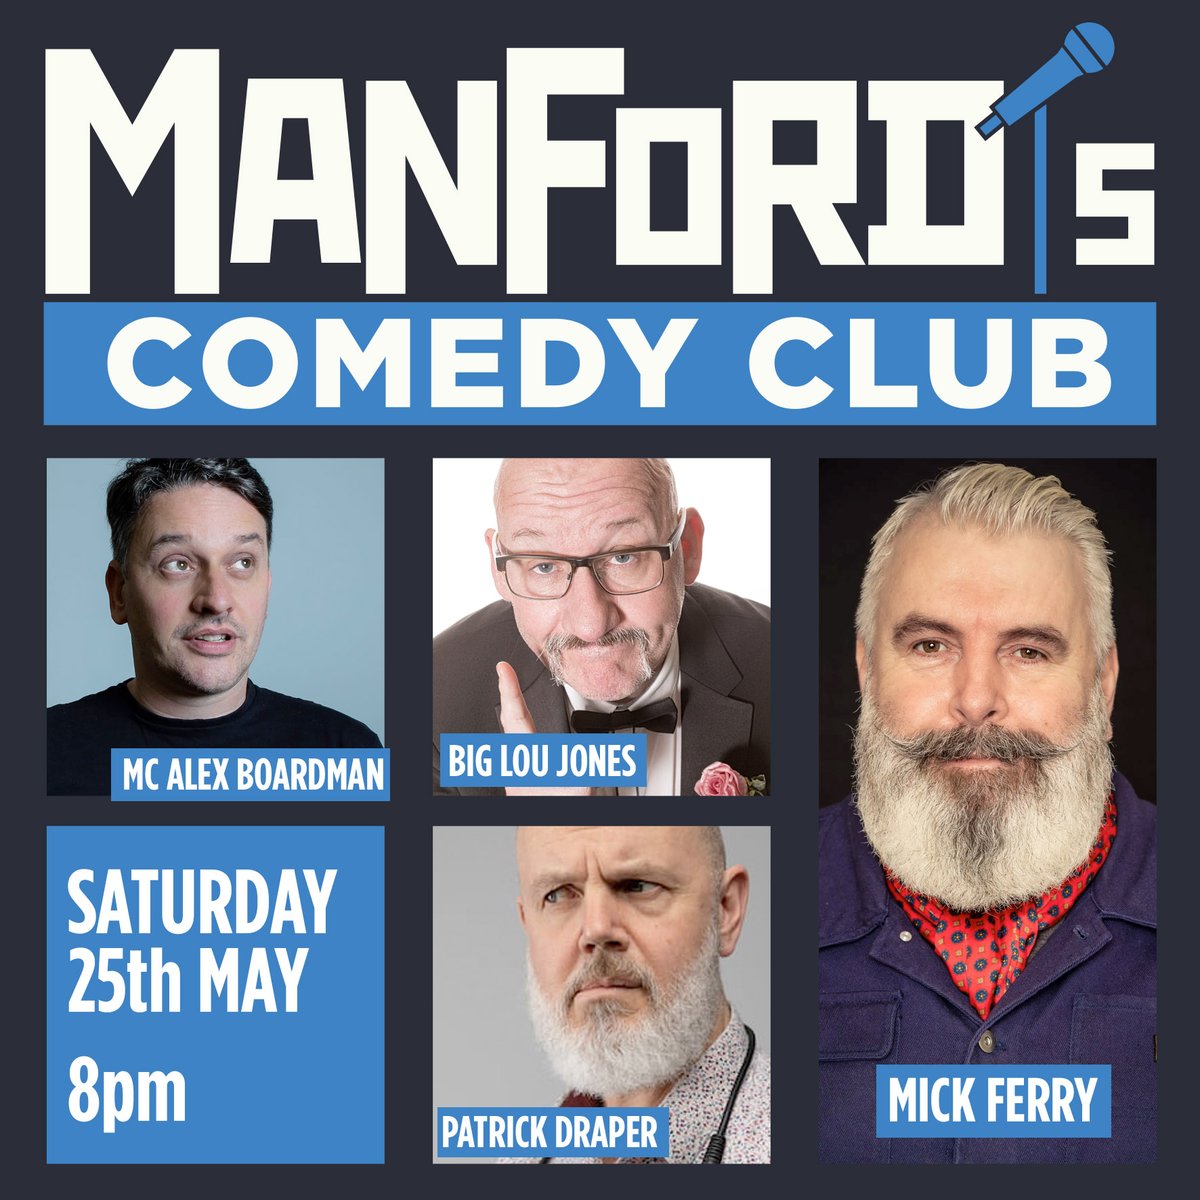 Another fantastic @manfordscomedy Club line-up this weekend: MC @alxboardman introduces Big Lou Jones, @PatrickDraper7 and the legendary @MickFerry. 8pm Saturday. ticketsource.co.uk/chorleytheatre…